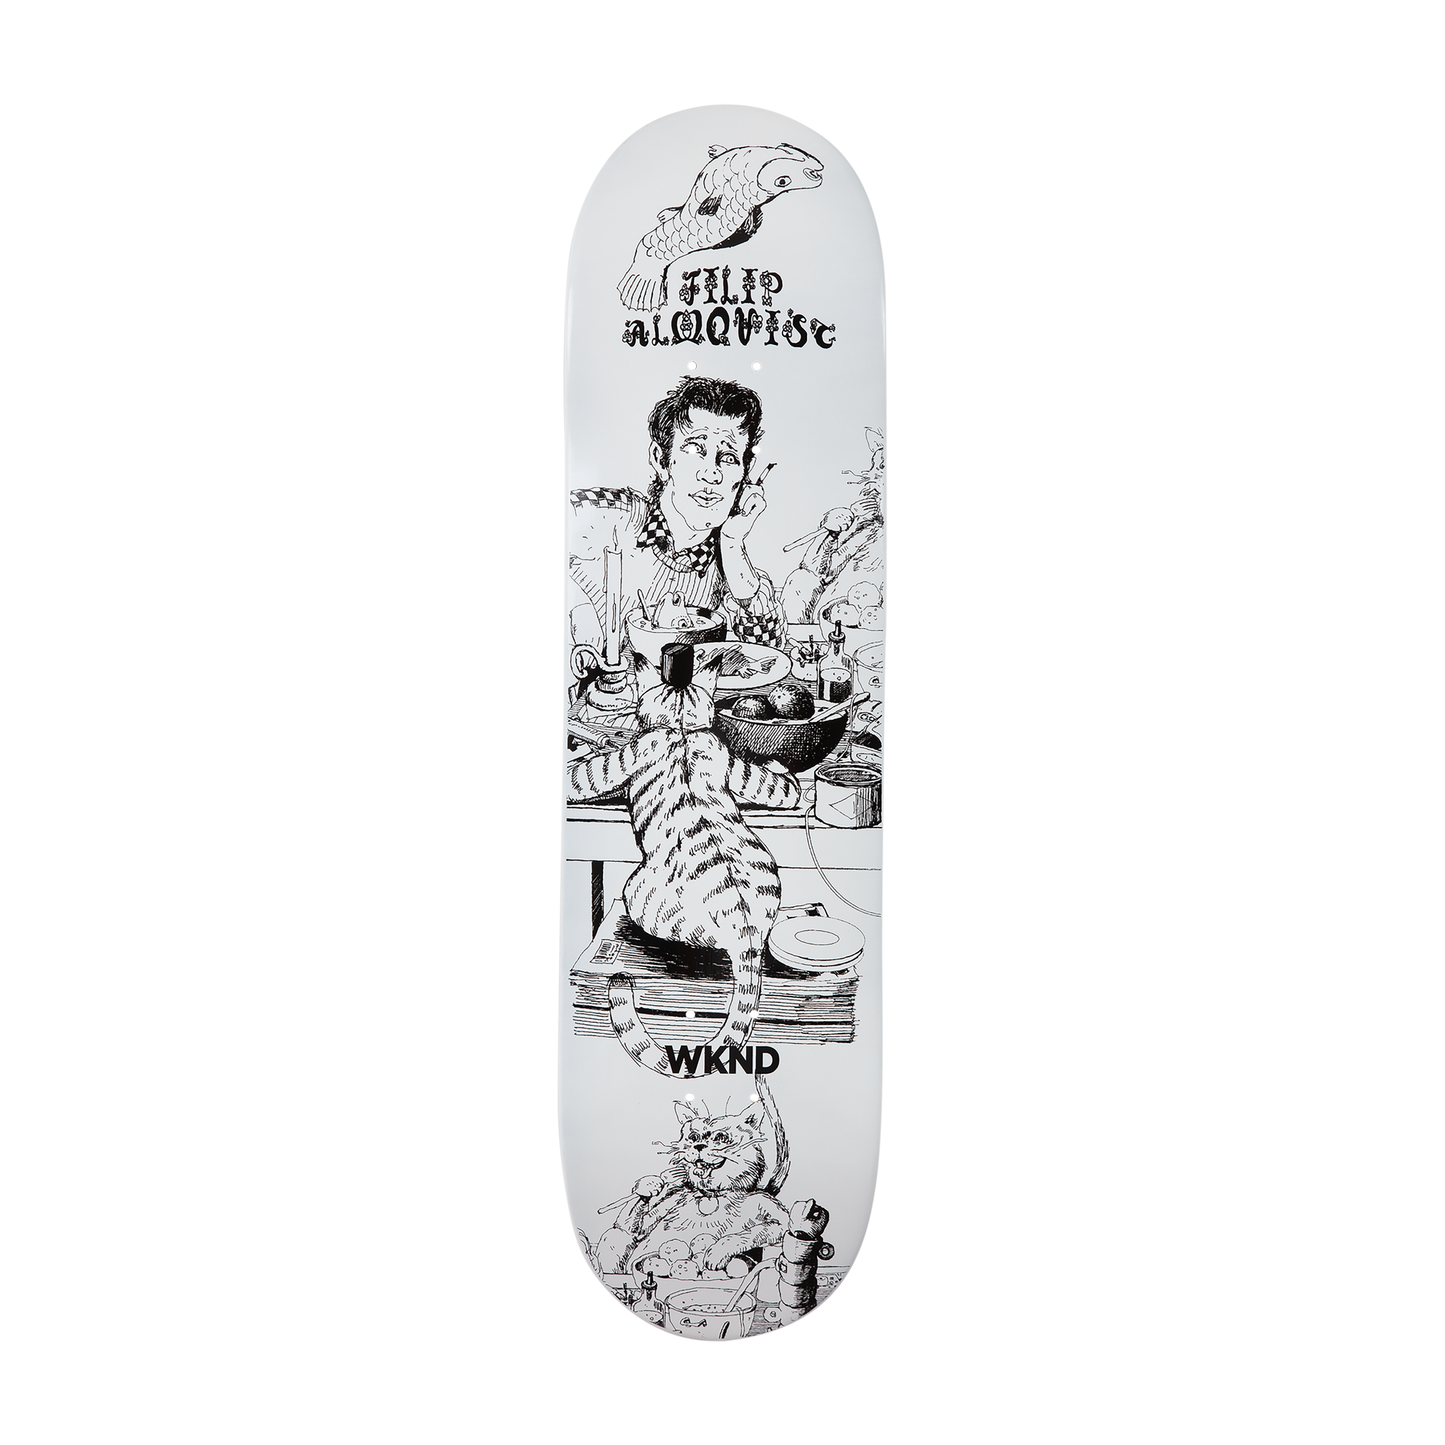 WKND SKATEBOARDS FILTHY ALMQVIST DECK DIPPED WHITE SIZE VARAINT